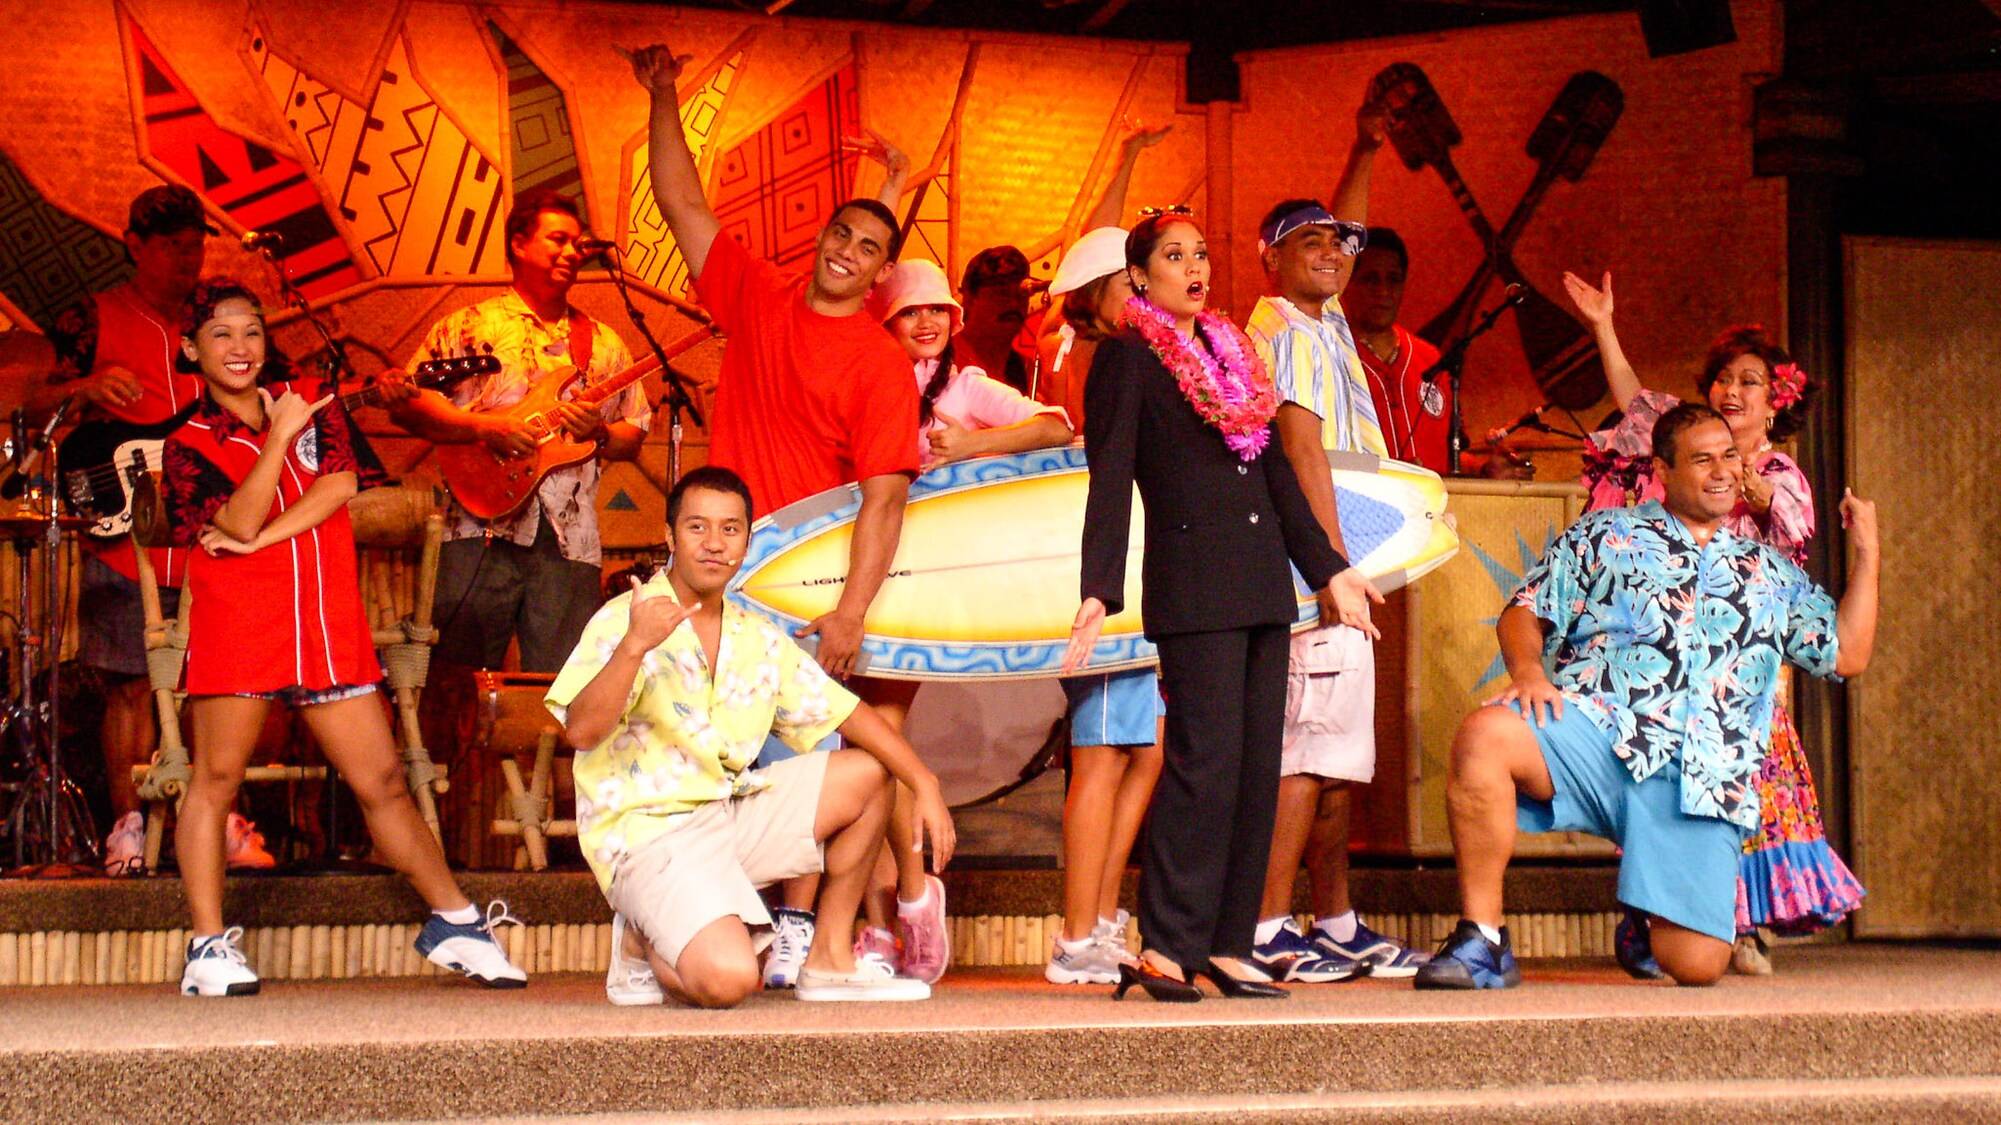 8pm Spirit of Aloha Dinner Show canceled for tonight due to cold weather